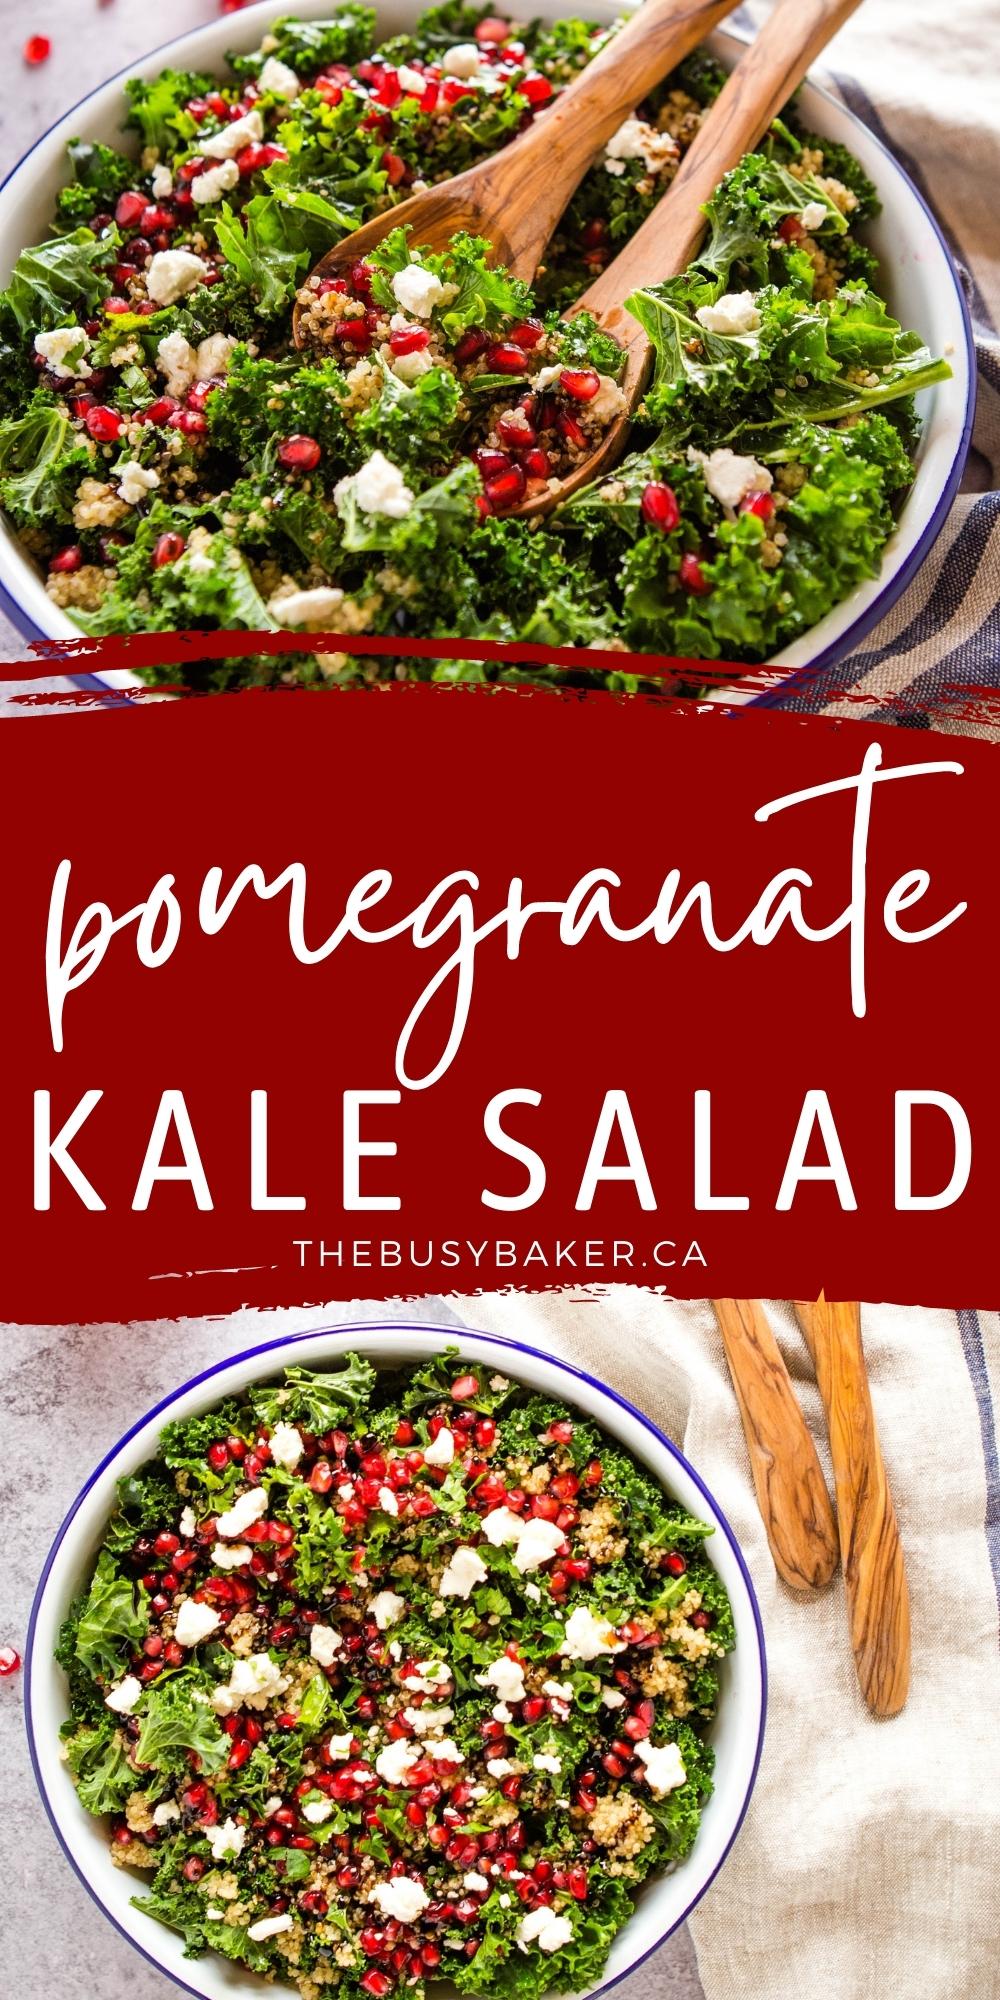 This Pomegranate Salad with Kale and Quinoa is both festive and healthy, and it makes the perfect holiday side dish or winter salad. Recipe from thebusybaker.ca! #quinoa #kale #pomegranate #saladwithkale #pomegranatesalad #holiday #sidedish #wintersalad via @busybakerblog